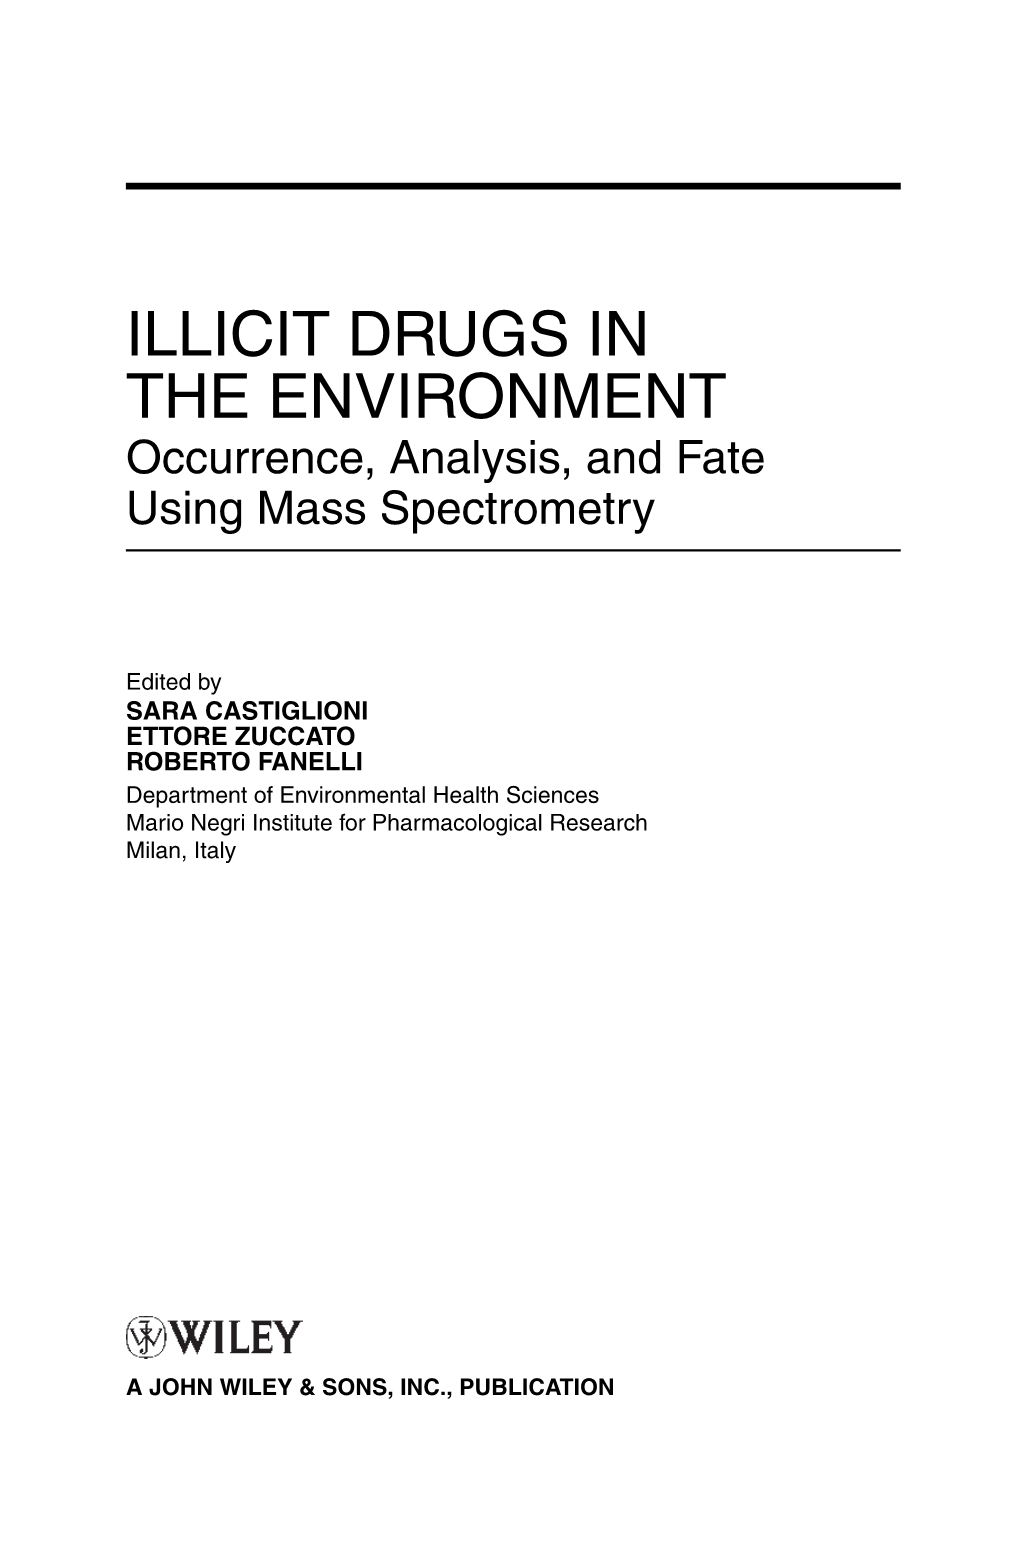 ILLICIT DRUGS in the ENVIRONMENT Occurrence, Analysis, and Fate Using Mass Spectrometry